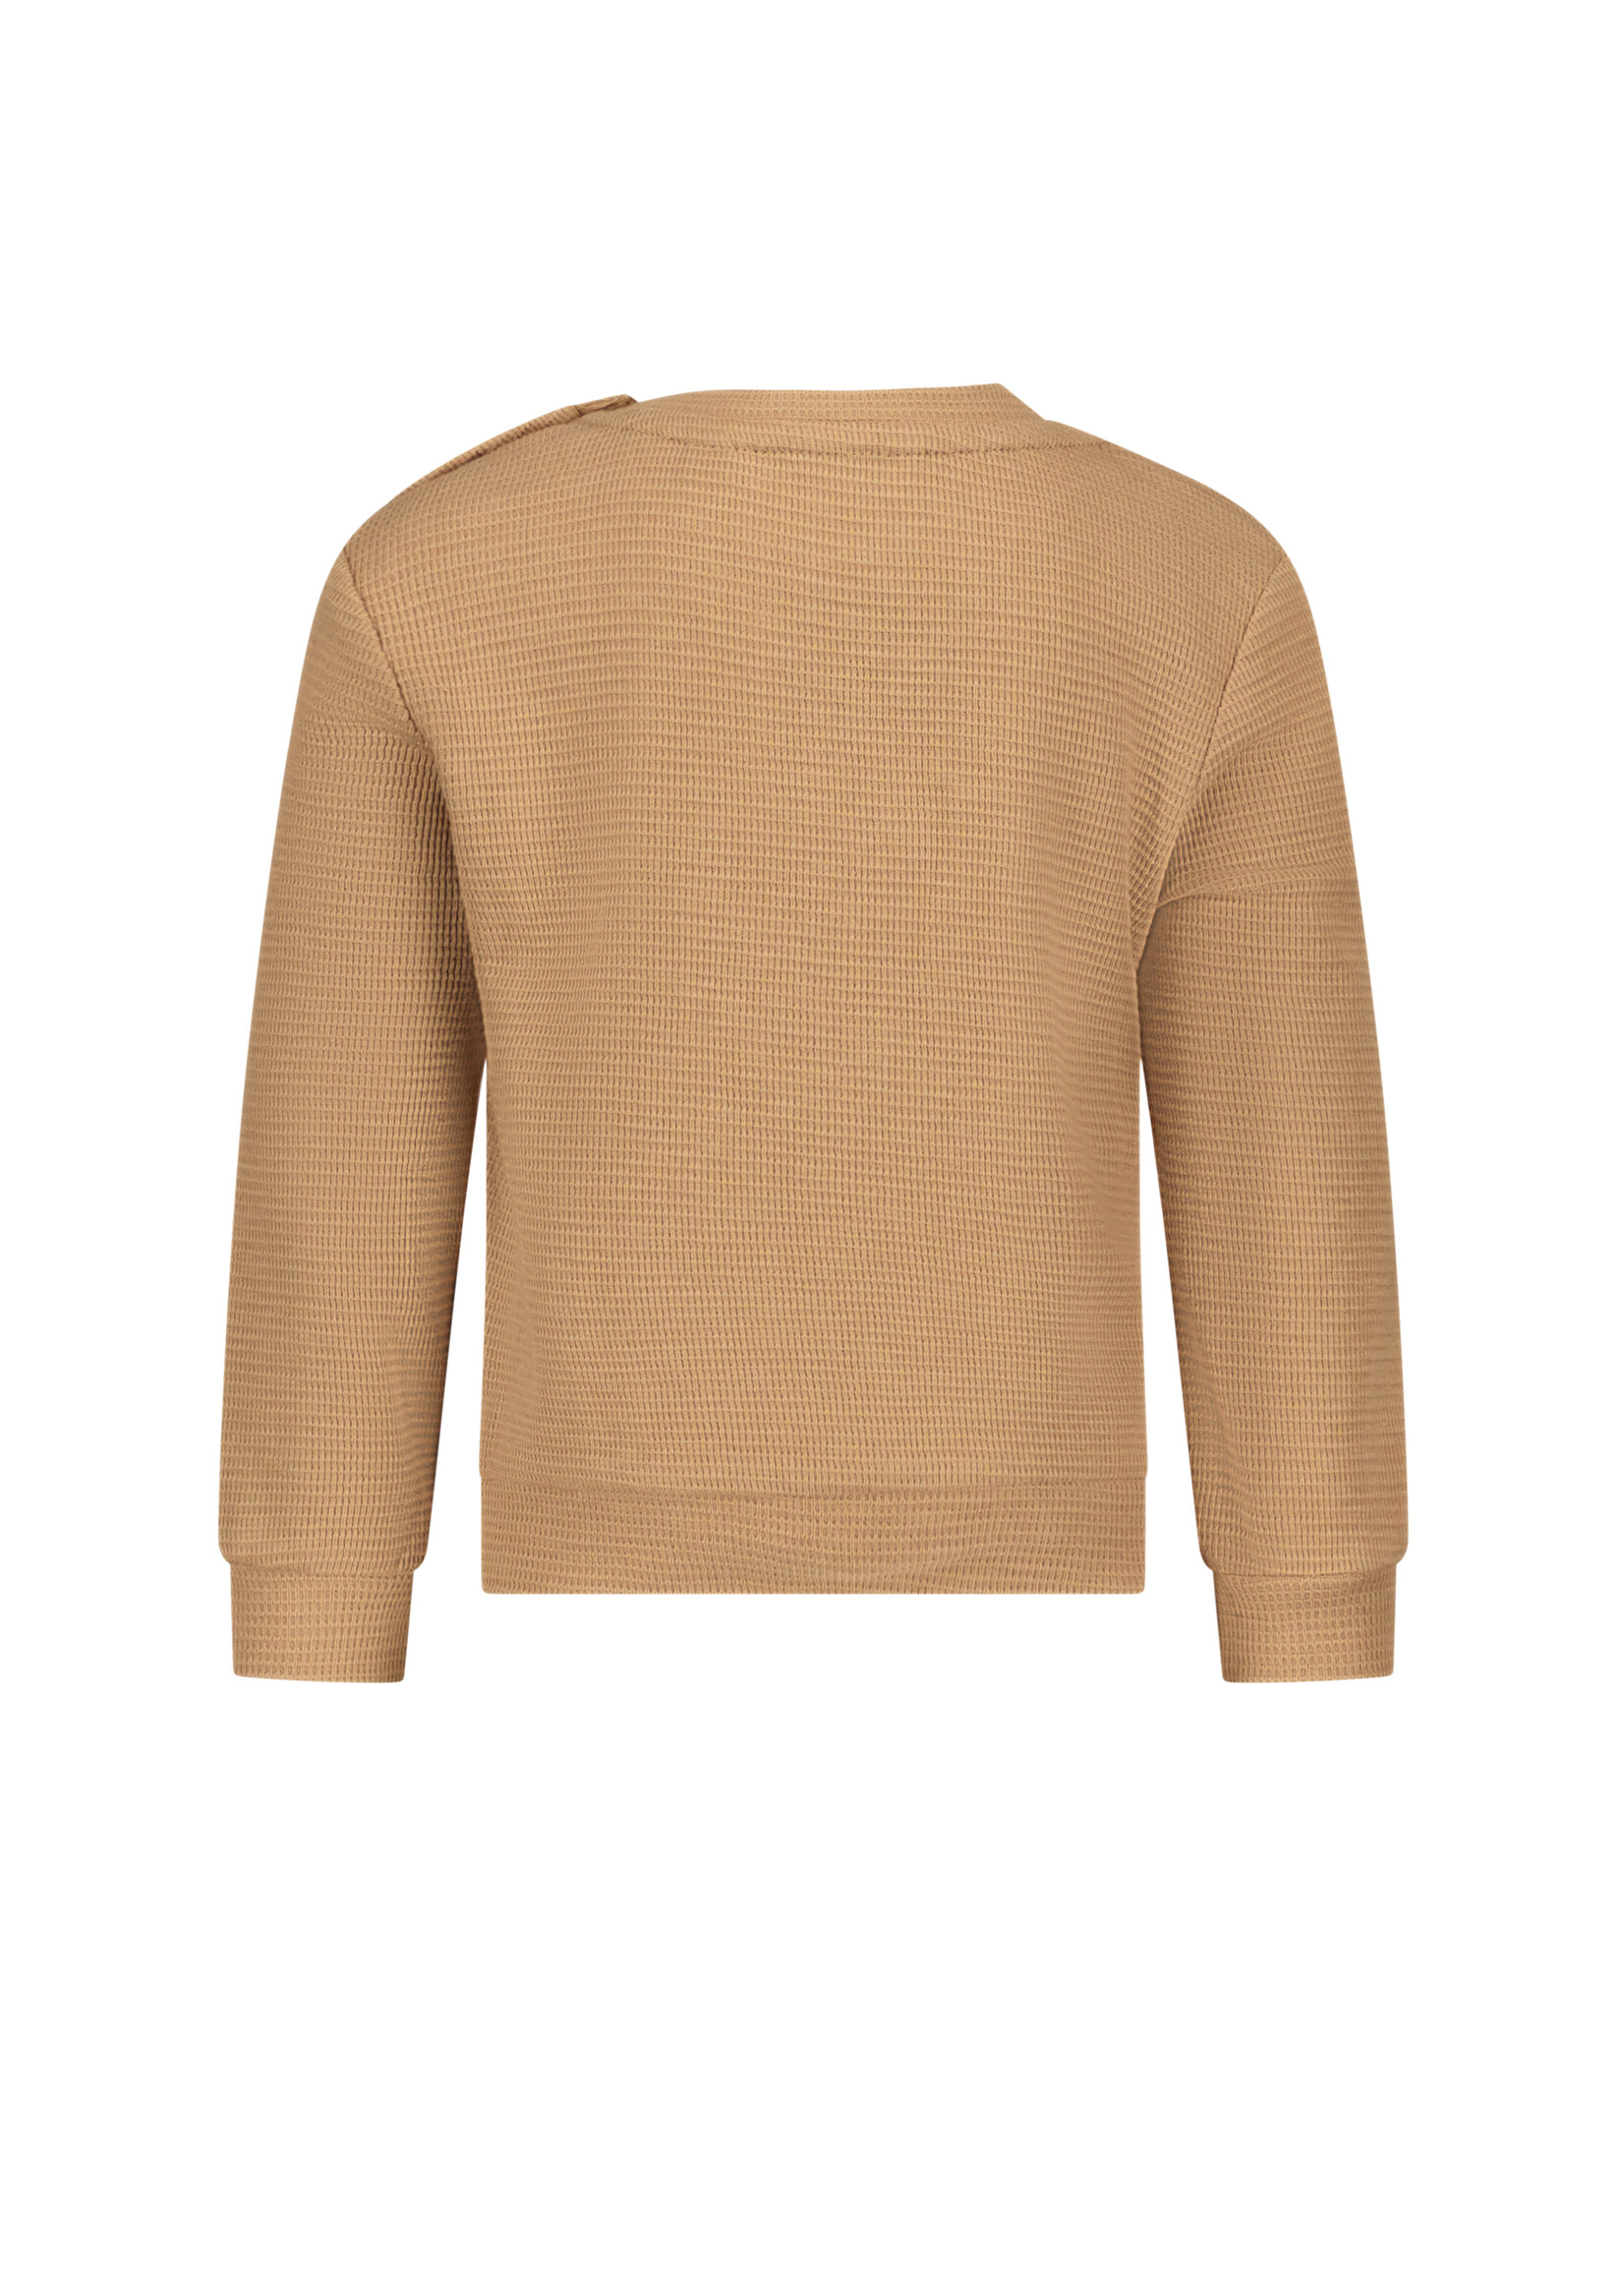 Le Chic Boys Baby L402-8330 ONNO waffle sweater Camel